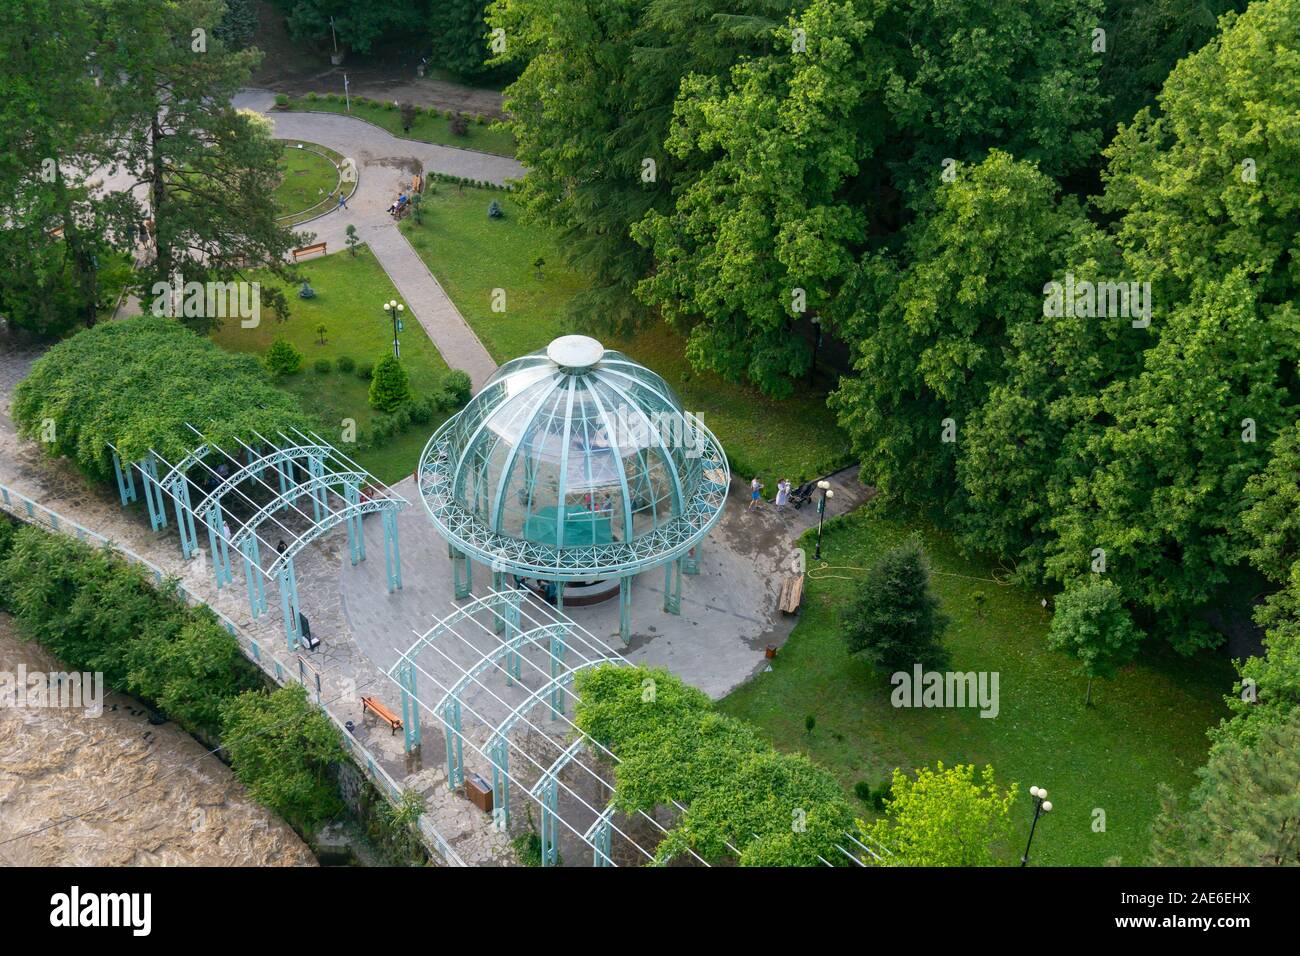 BORJOMI, GEORGIA - JUNE 27, 2019: The Borjomi cable car rides over the Mineral Water Park with its blue pavilion, hiding the water source, Georgia. Stock Photo